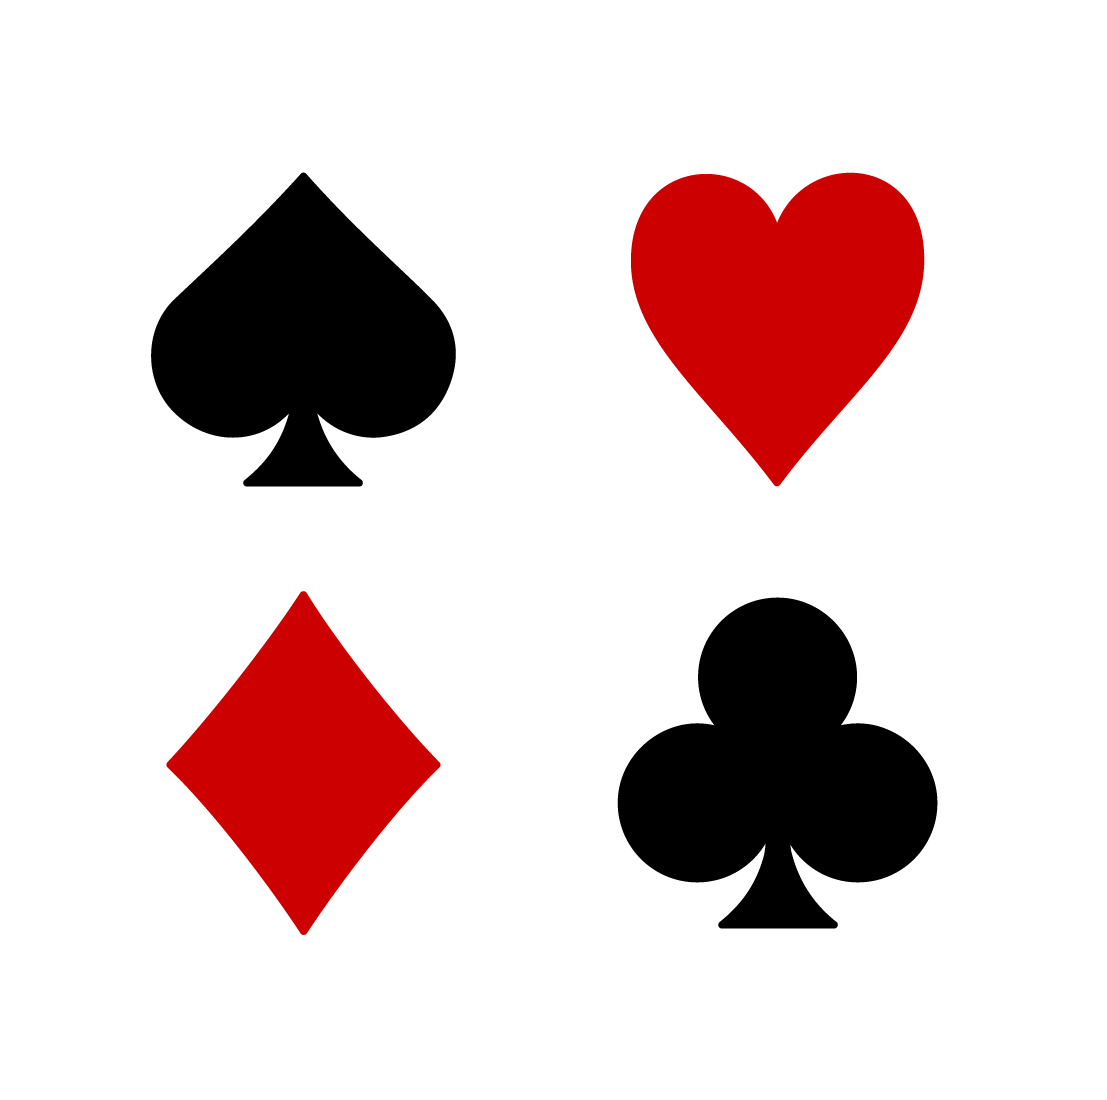 Playing card suits | Forrest Media